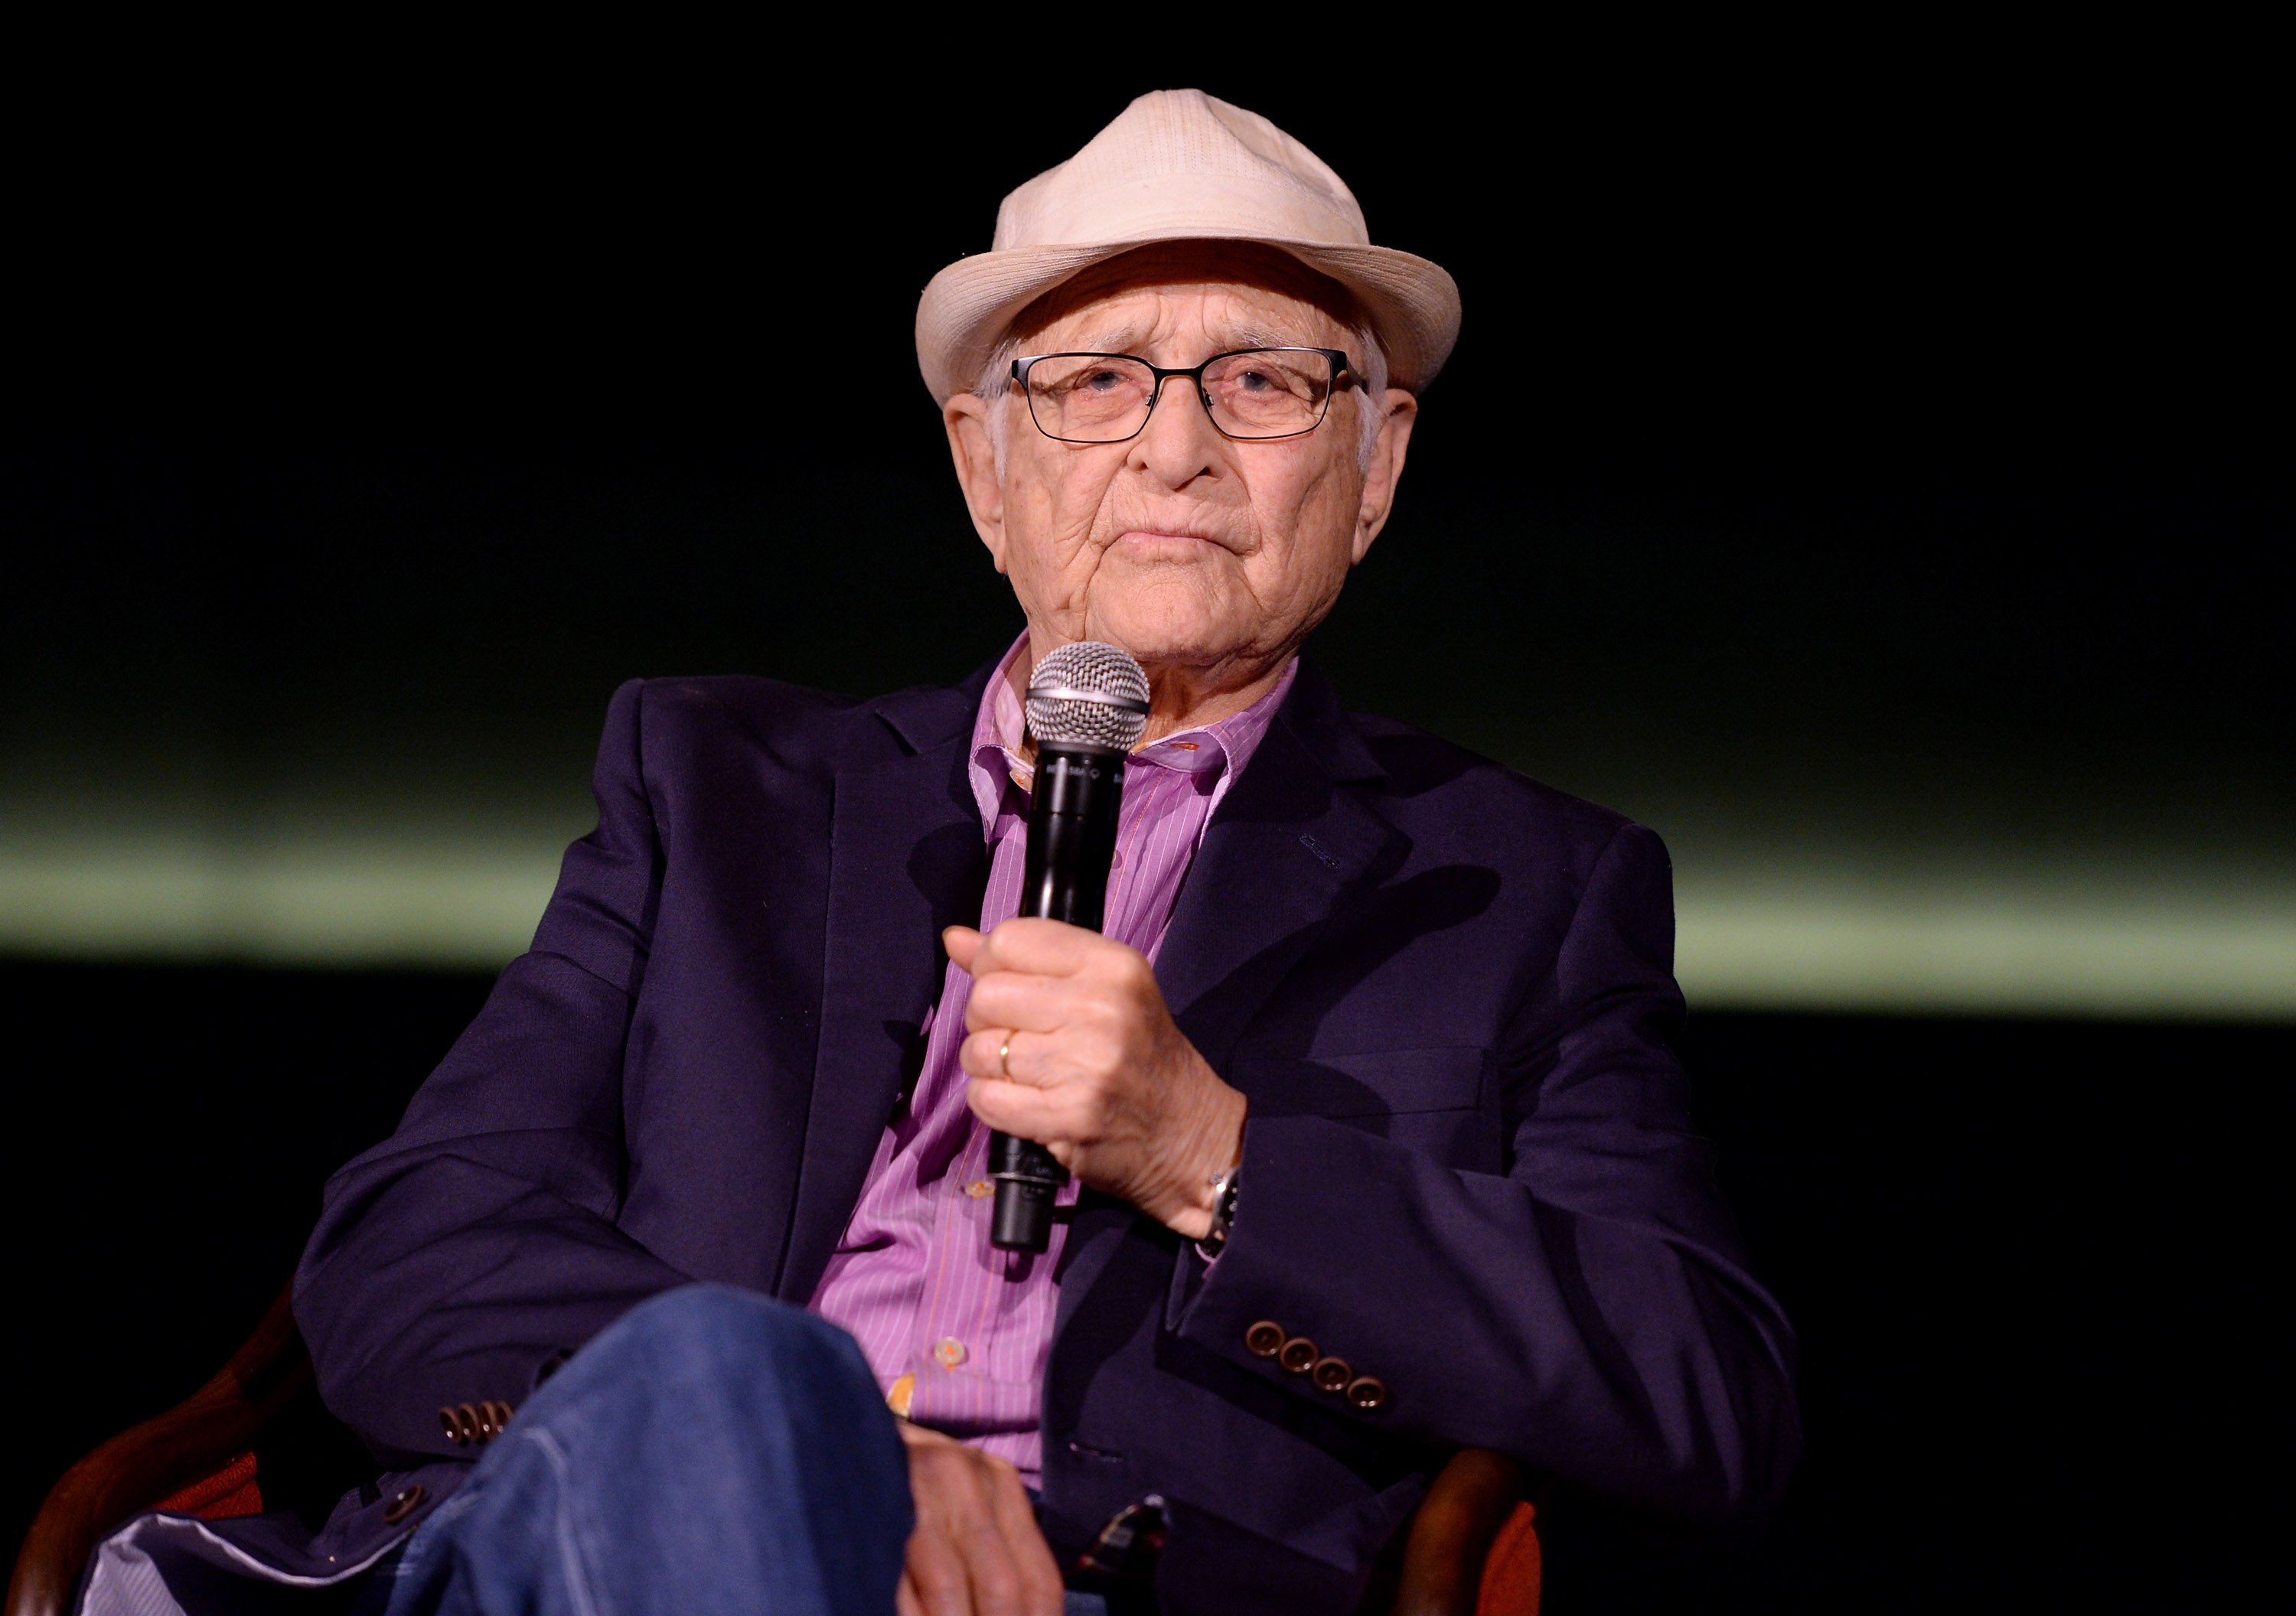 Norman Lear attending the TOMS, "VOTE2016" Conversation on March 10, 2016 in Santa Monica, California. | Source: Getty Images)